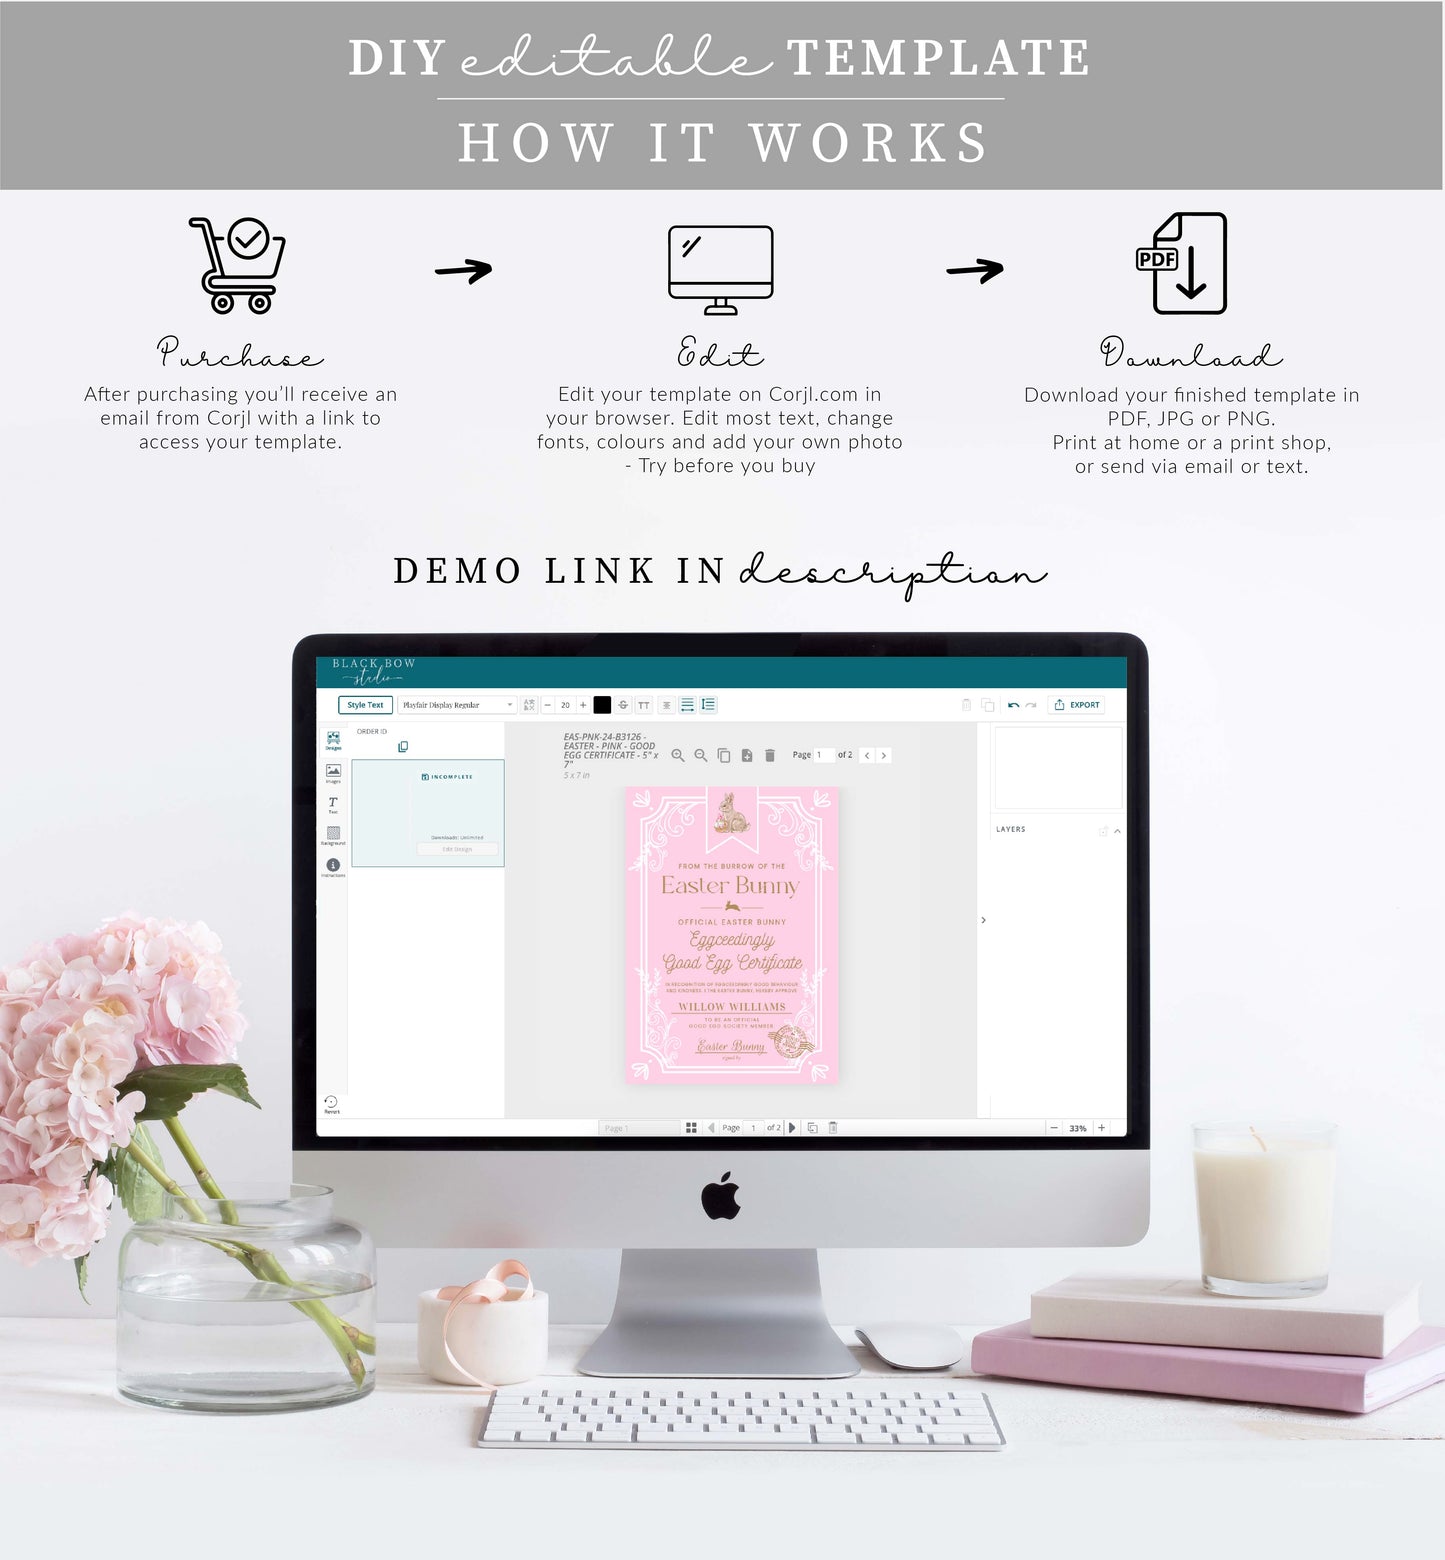 Easter Pink | Printable Good Egg Certificate Template